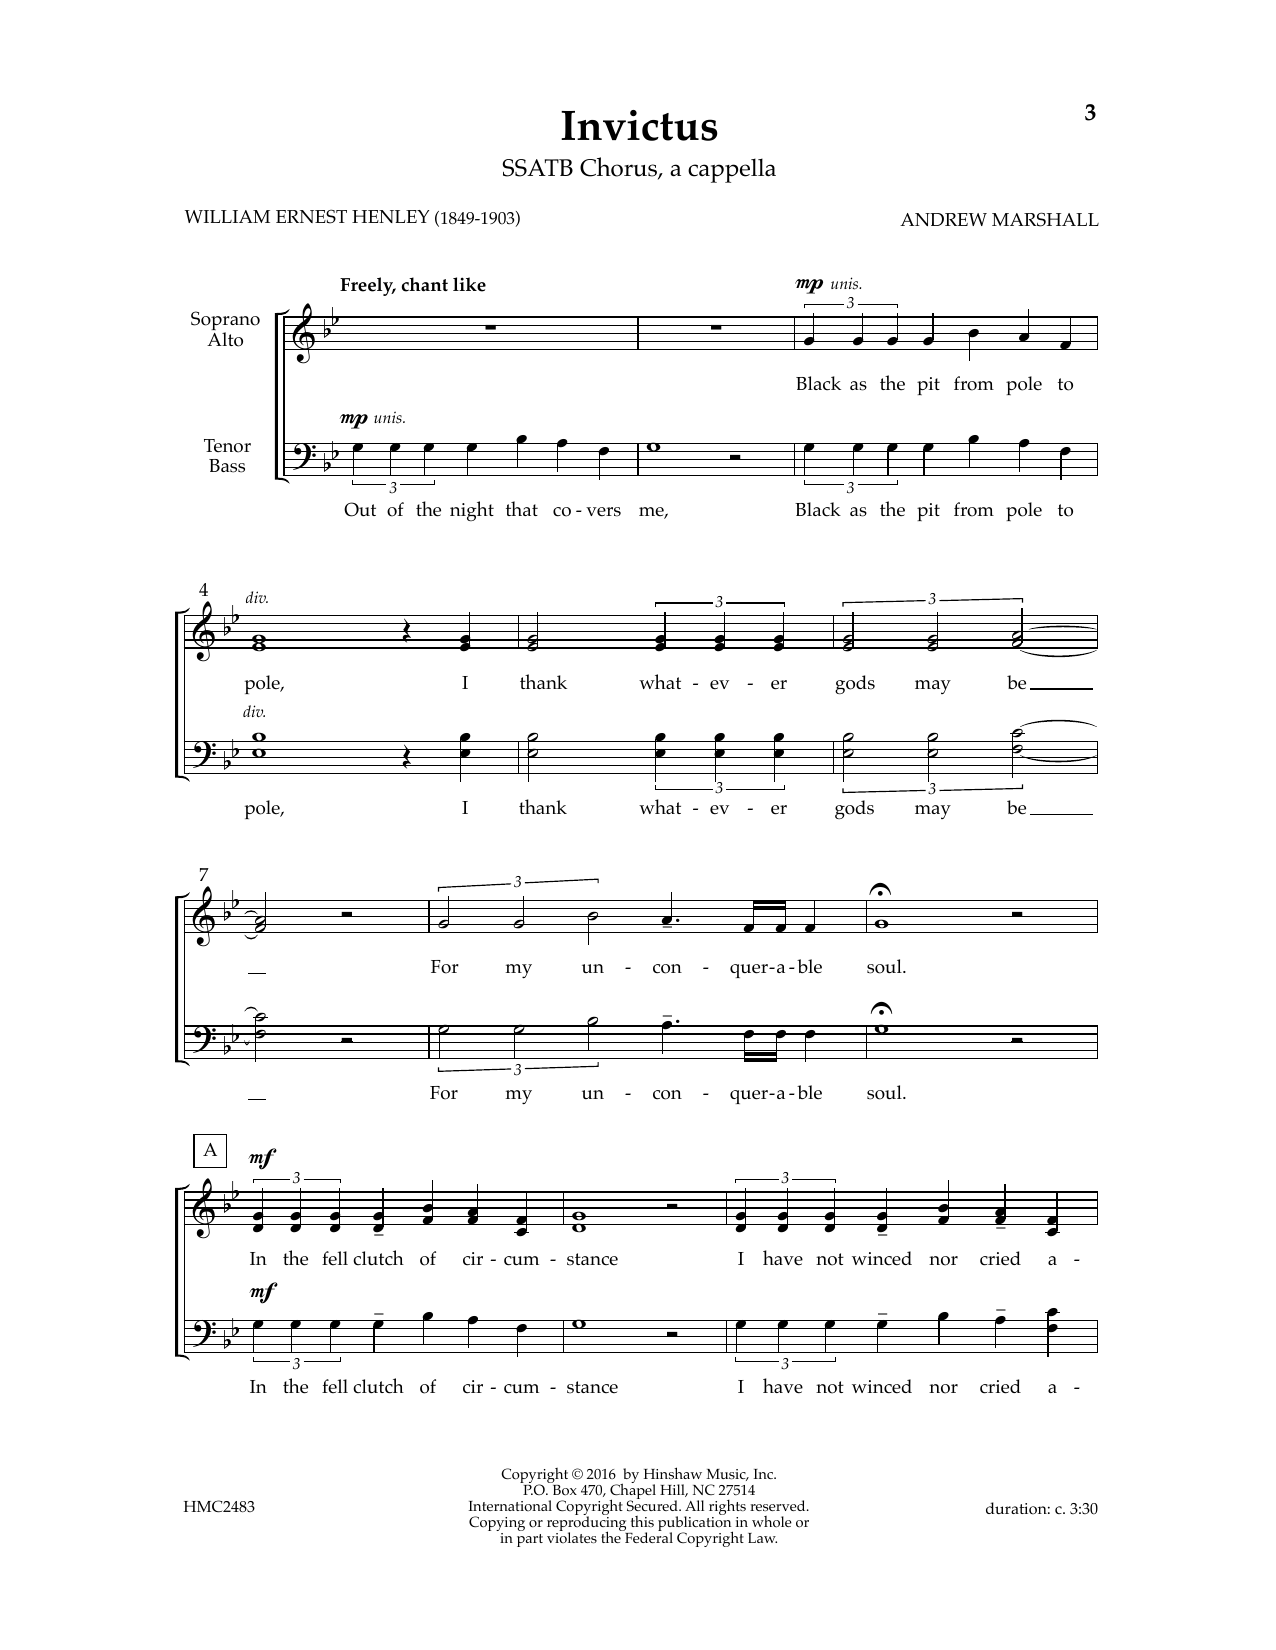 Andy Marshall Invictus sheet music notes and chords. Download Printable PDF.